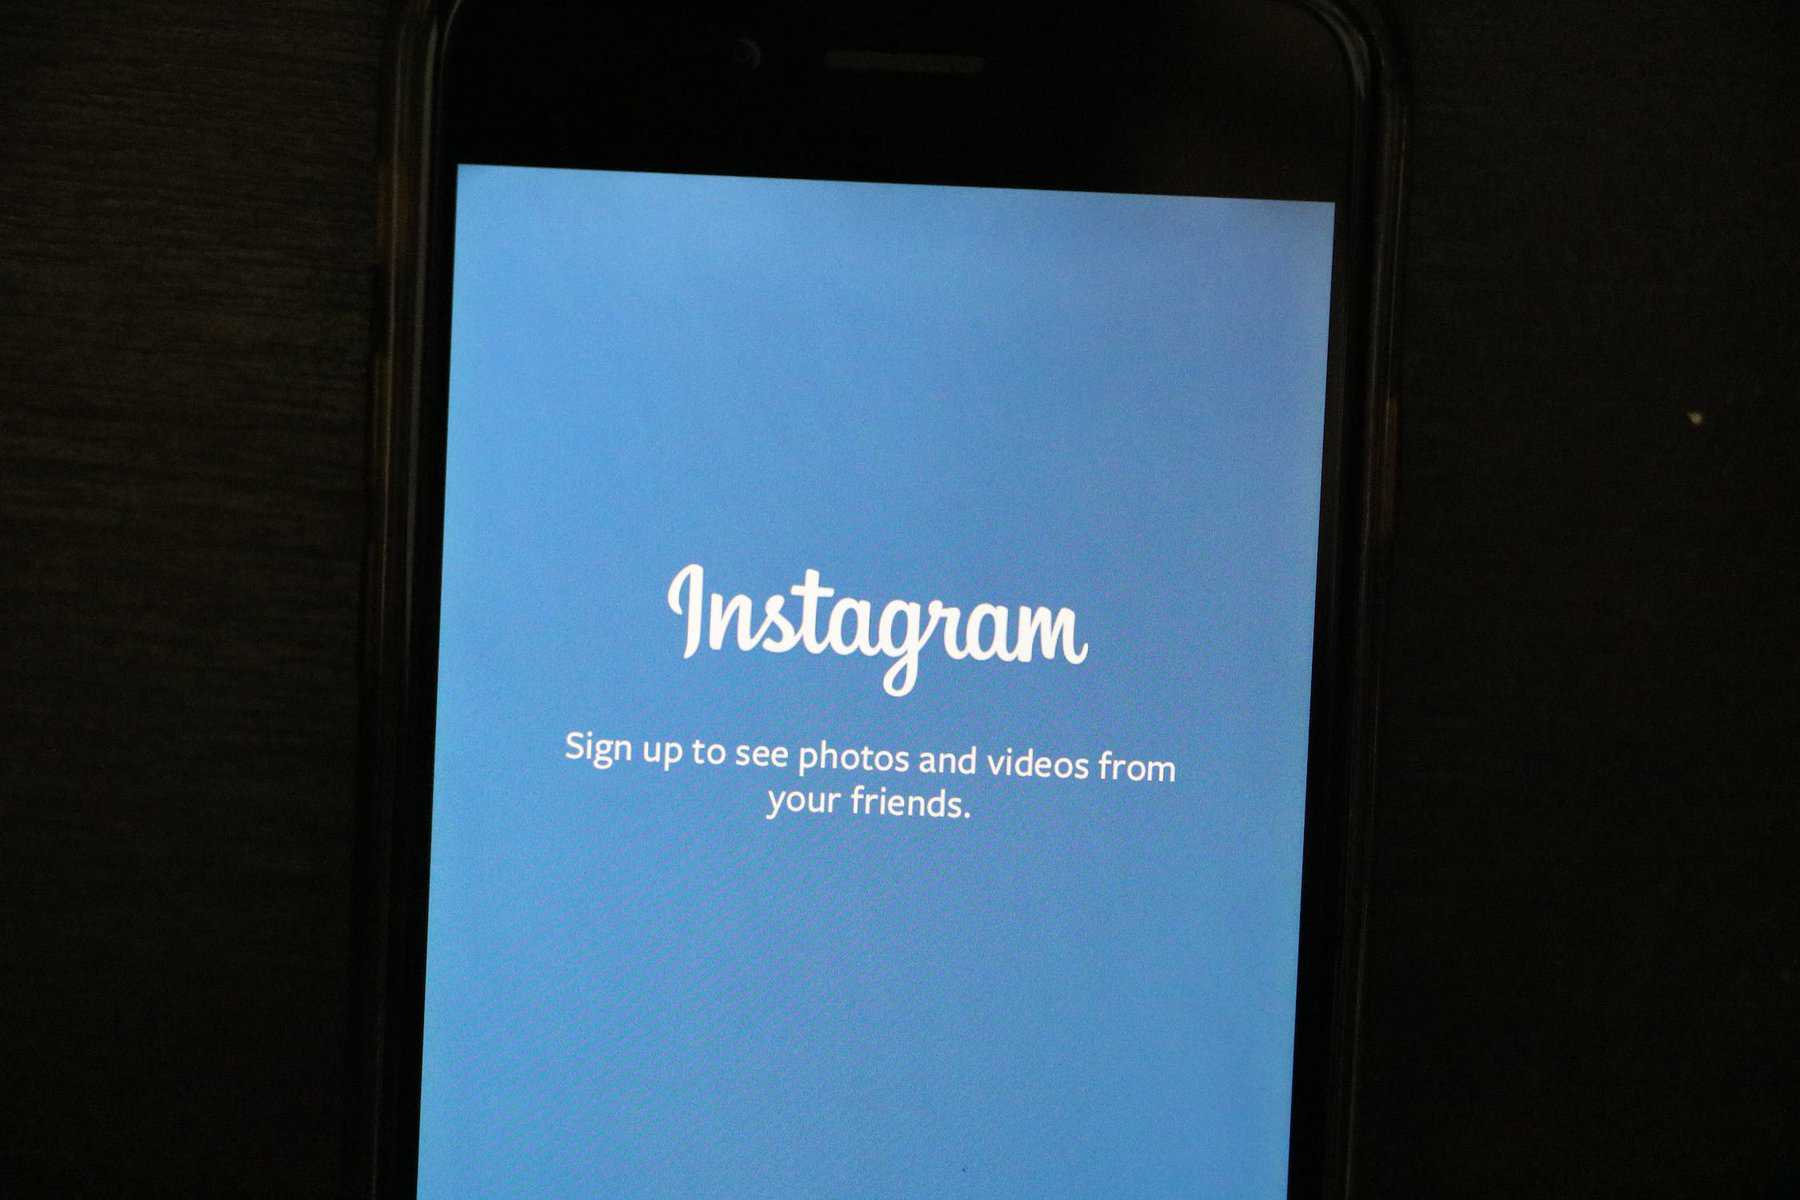 Instagram log in page